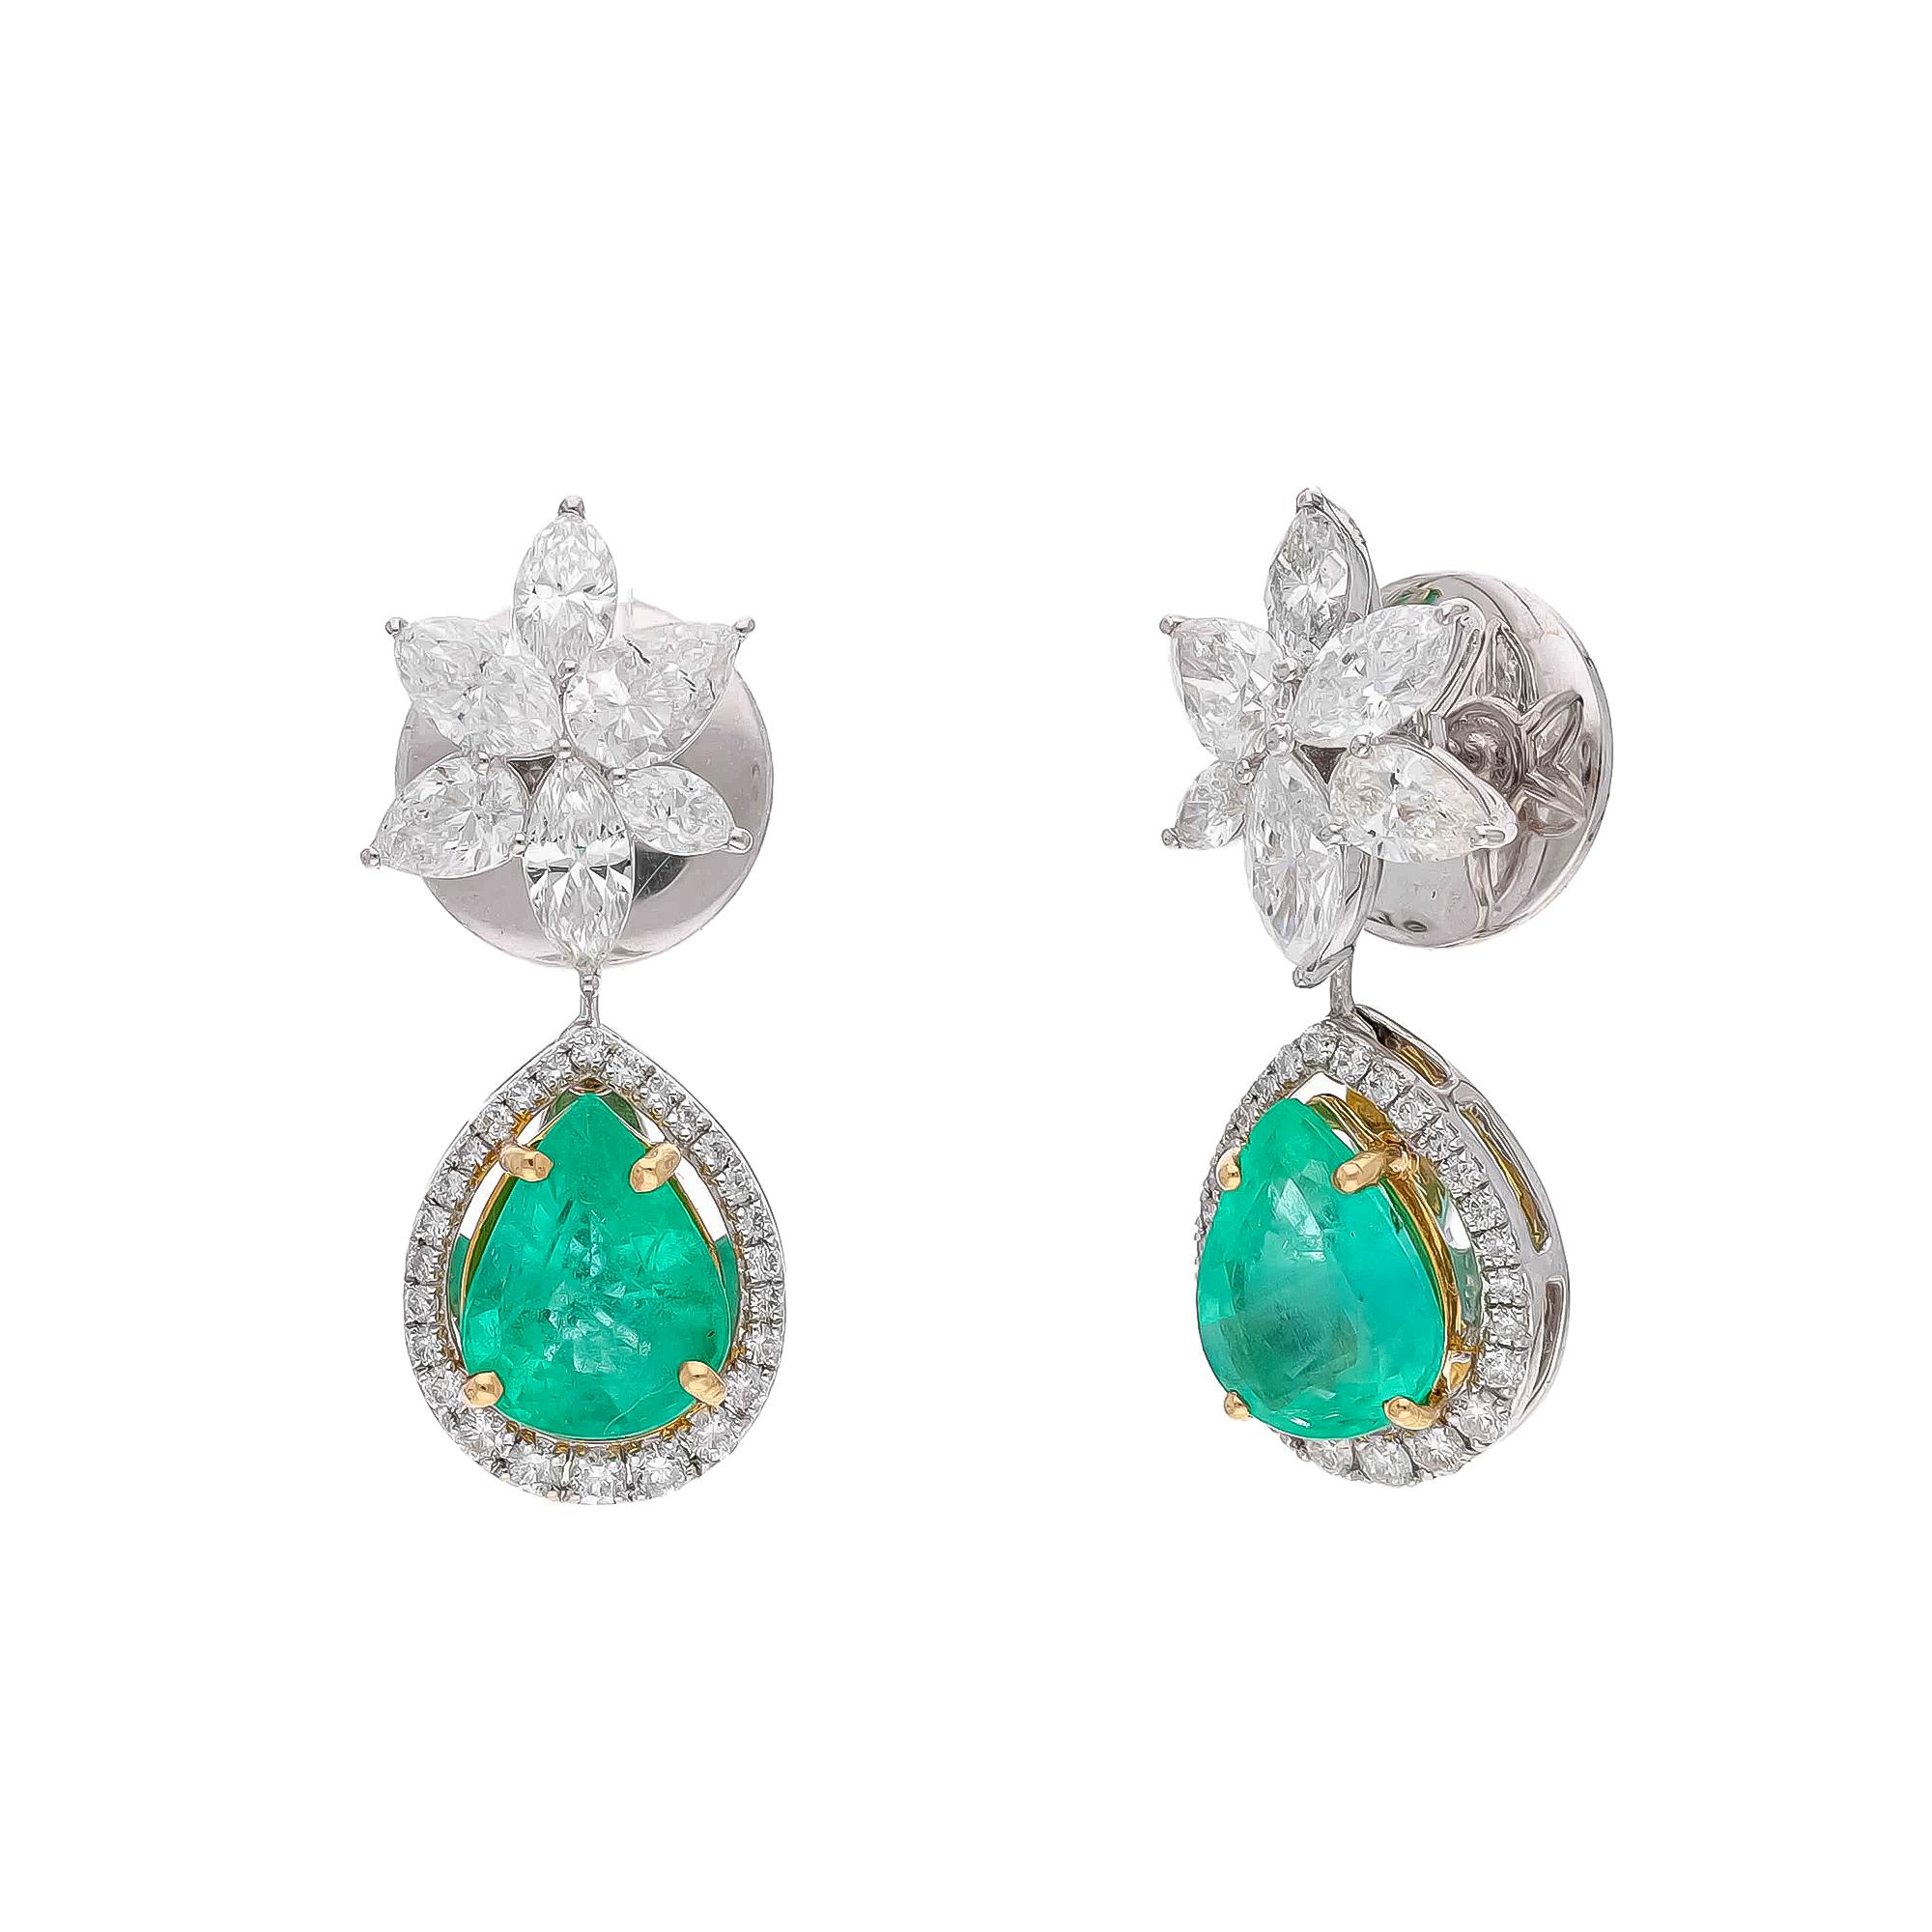 Diamonds: 2.34 carats
Emerald : 2.93 carats
18k Gold : 6.53 GMs
Beautiful dangle earring
All large pear shape diamonds are making a flower stud from which hangs a pear shape natural Zambian emerald.
The emerald is surrounded by brilliant cut